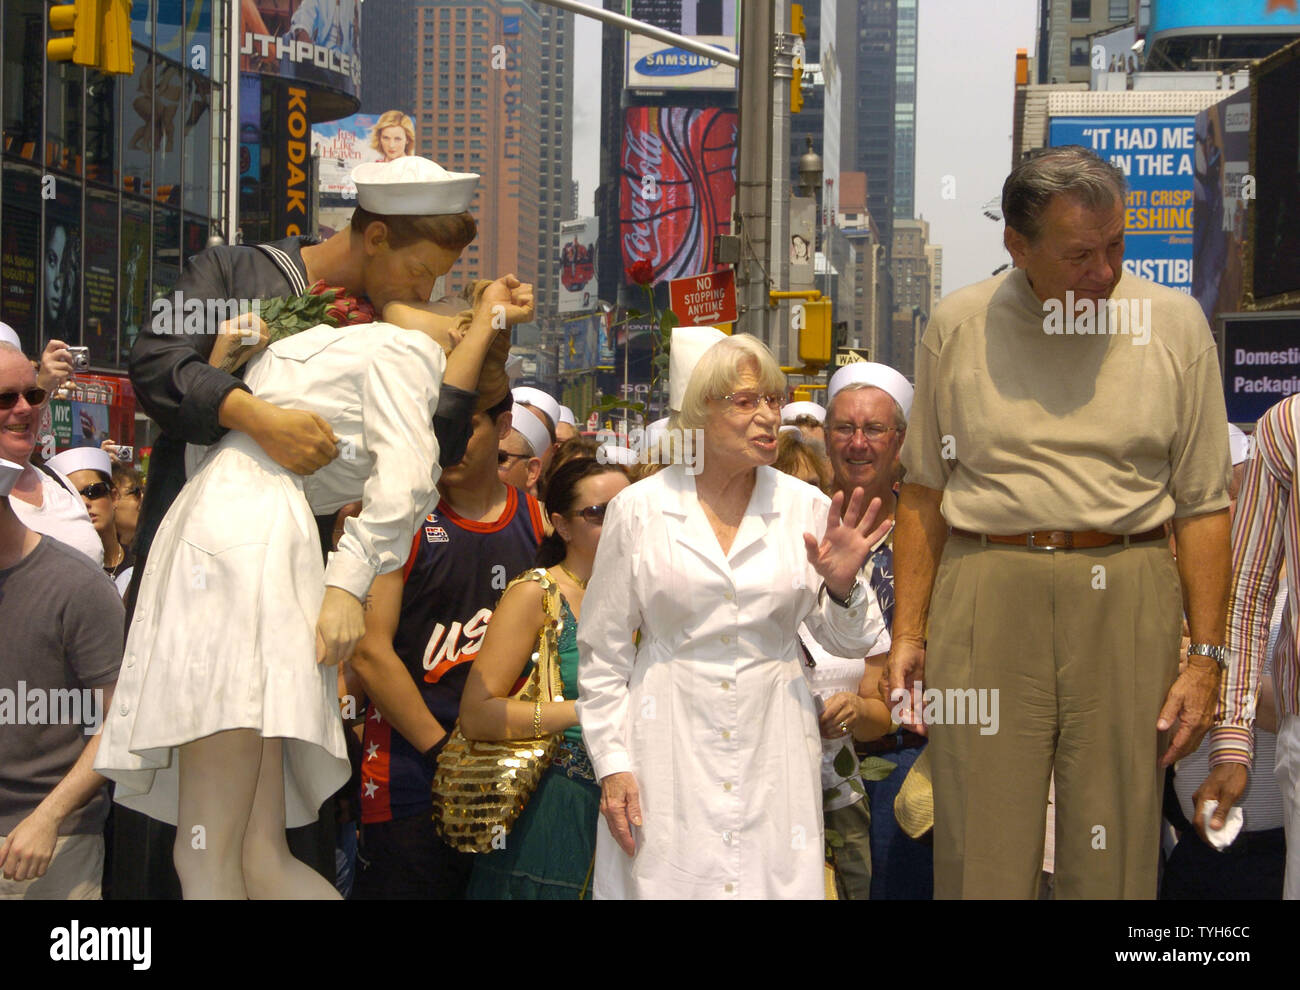 Edith Shain and Carl Muscarello are shown next to the Unconditional Surrender Sculpture at the 60th Anniversary of the end of World War II in Times Square on August 14, 2005.  They were recreating the famous pose from the Alfred Eisenstadt photograph celebrating the Allied victory in the war. They claim to be the original couple in the photograph.   (UPI Photo/Robin Platzer) Stock Photo